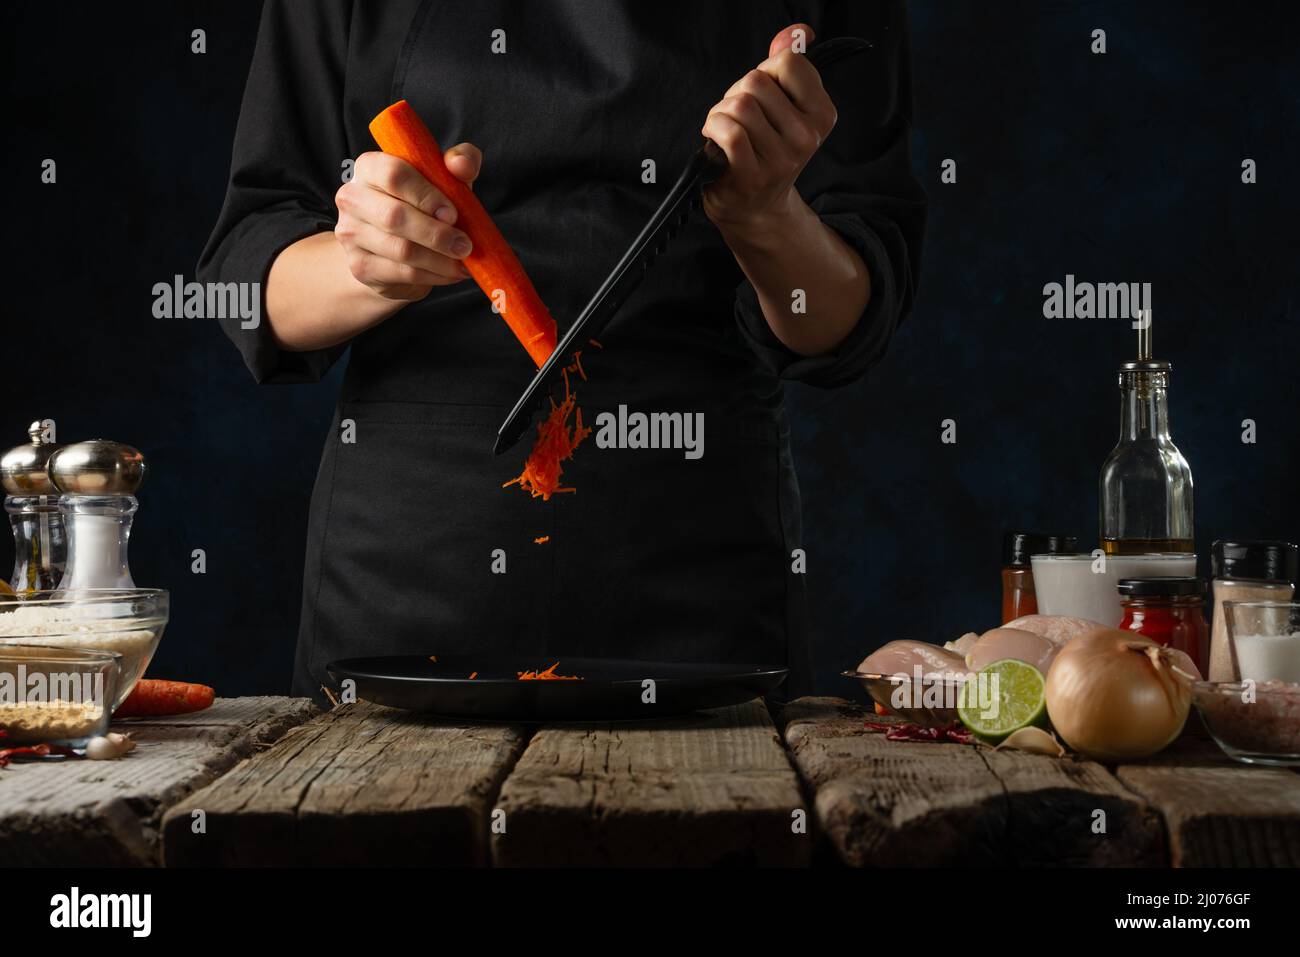 https://c8.alamy.com/comp/2J076GF/professional-chef-grates-carrot-on-the-plate-backstage-of-cooking-traditional-indian-chicken-curry-on-dark-blue-background-frozen-motion-concept-of-2J076GF.jpg